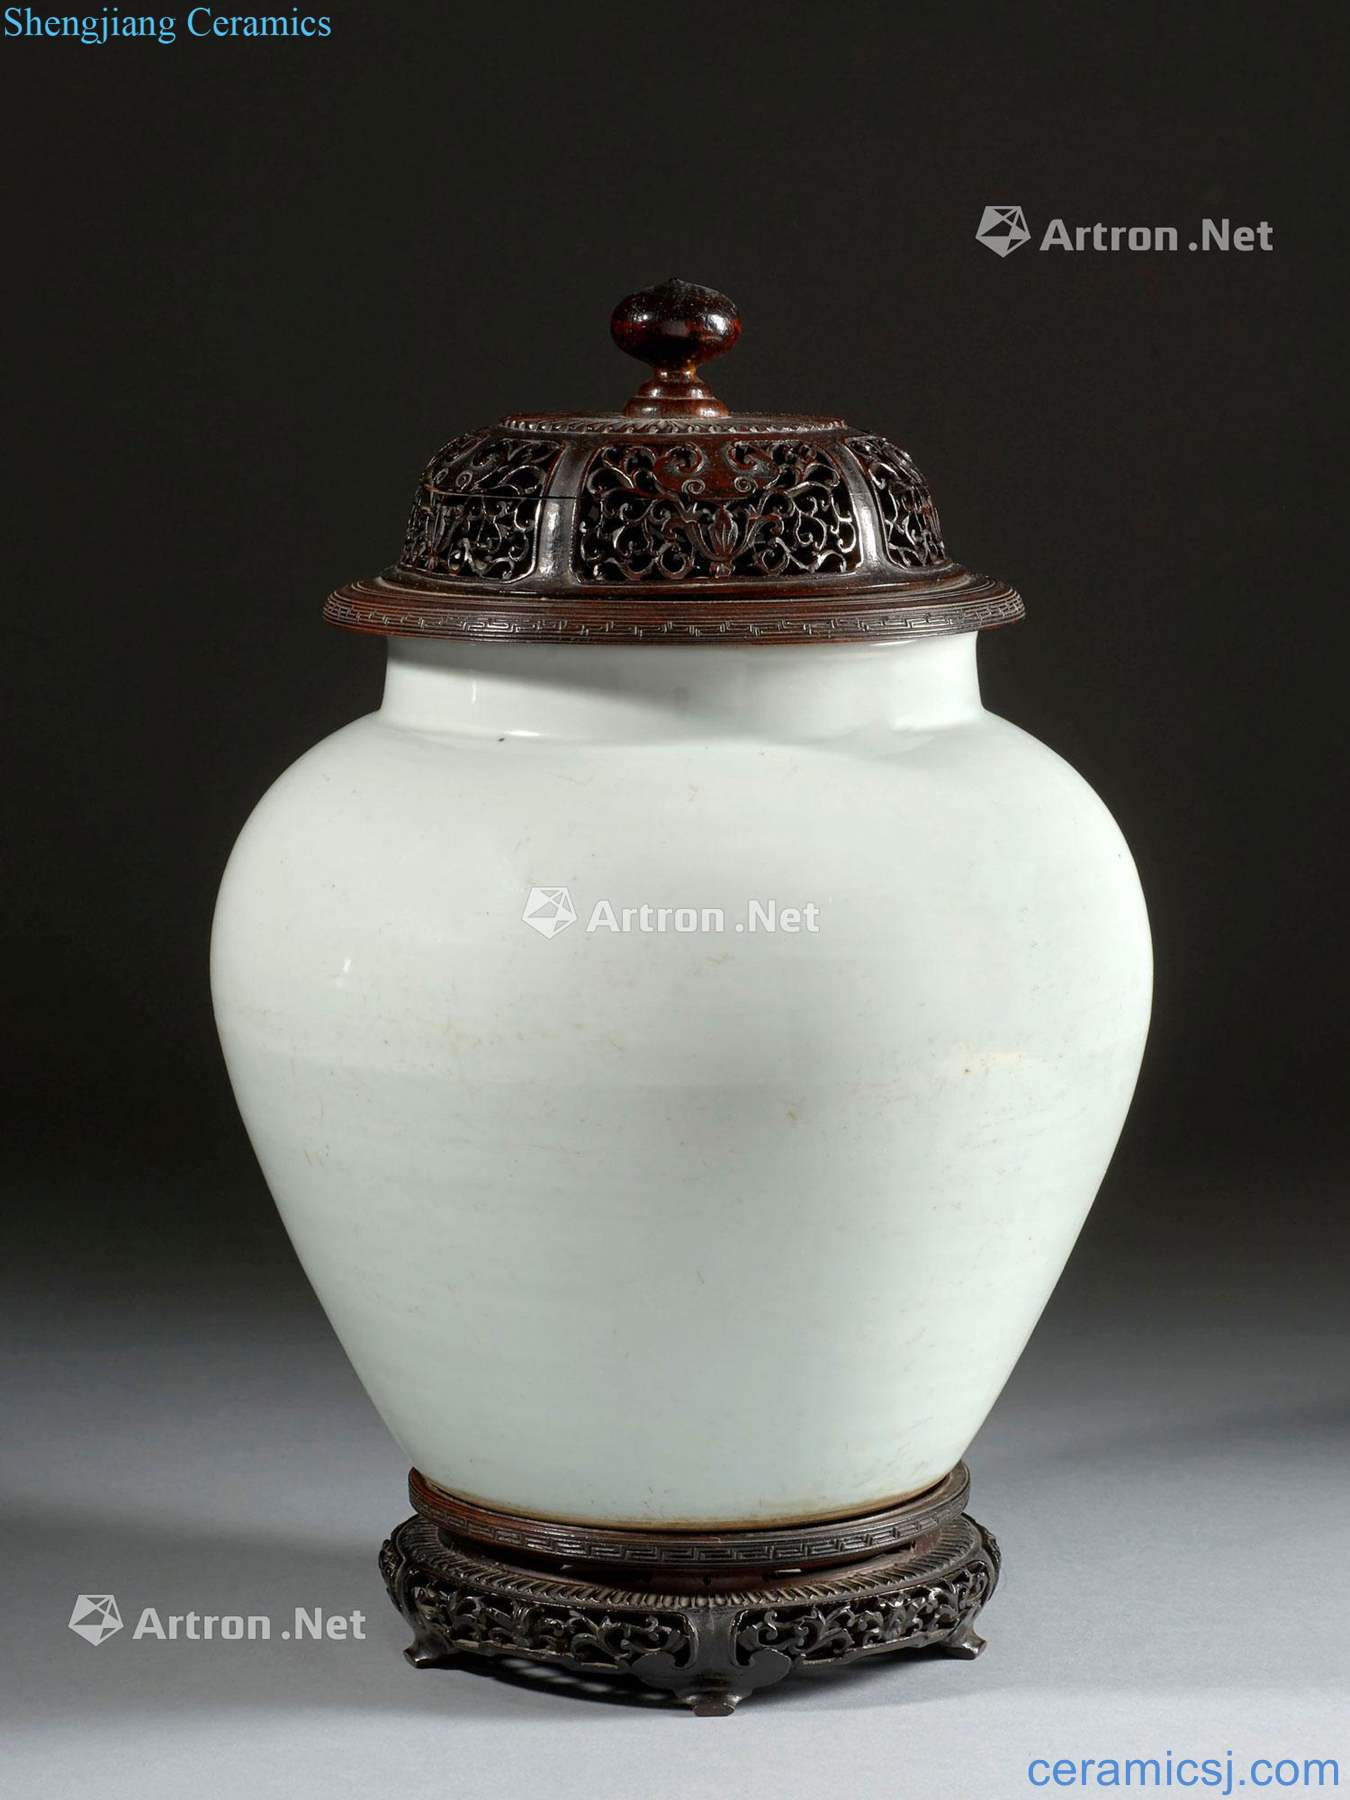 CHINA, 17 th - 18 th CENTURY A WHITE PORCELAIN VASE AND WOODEN COVER AND STAND